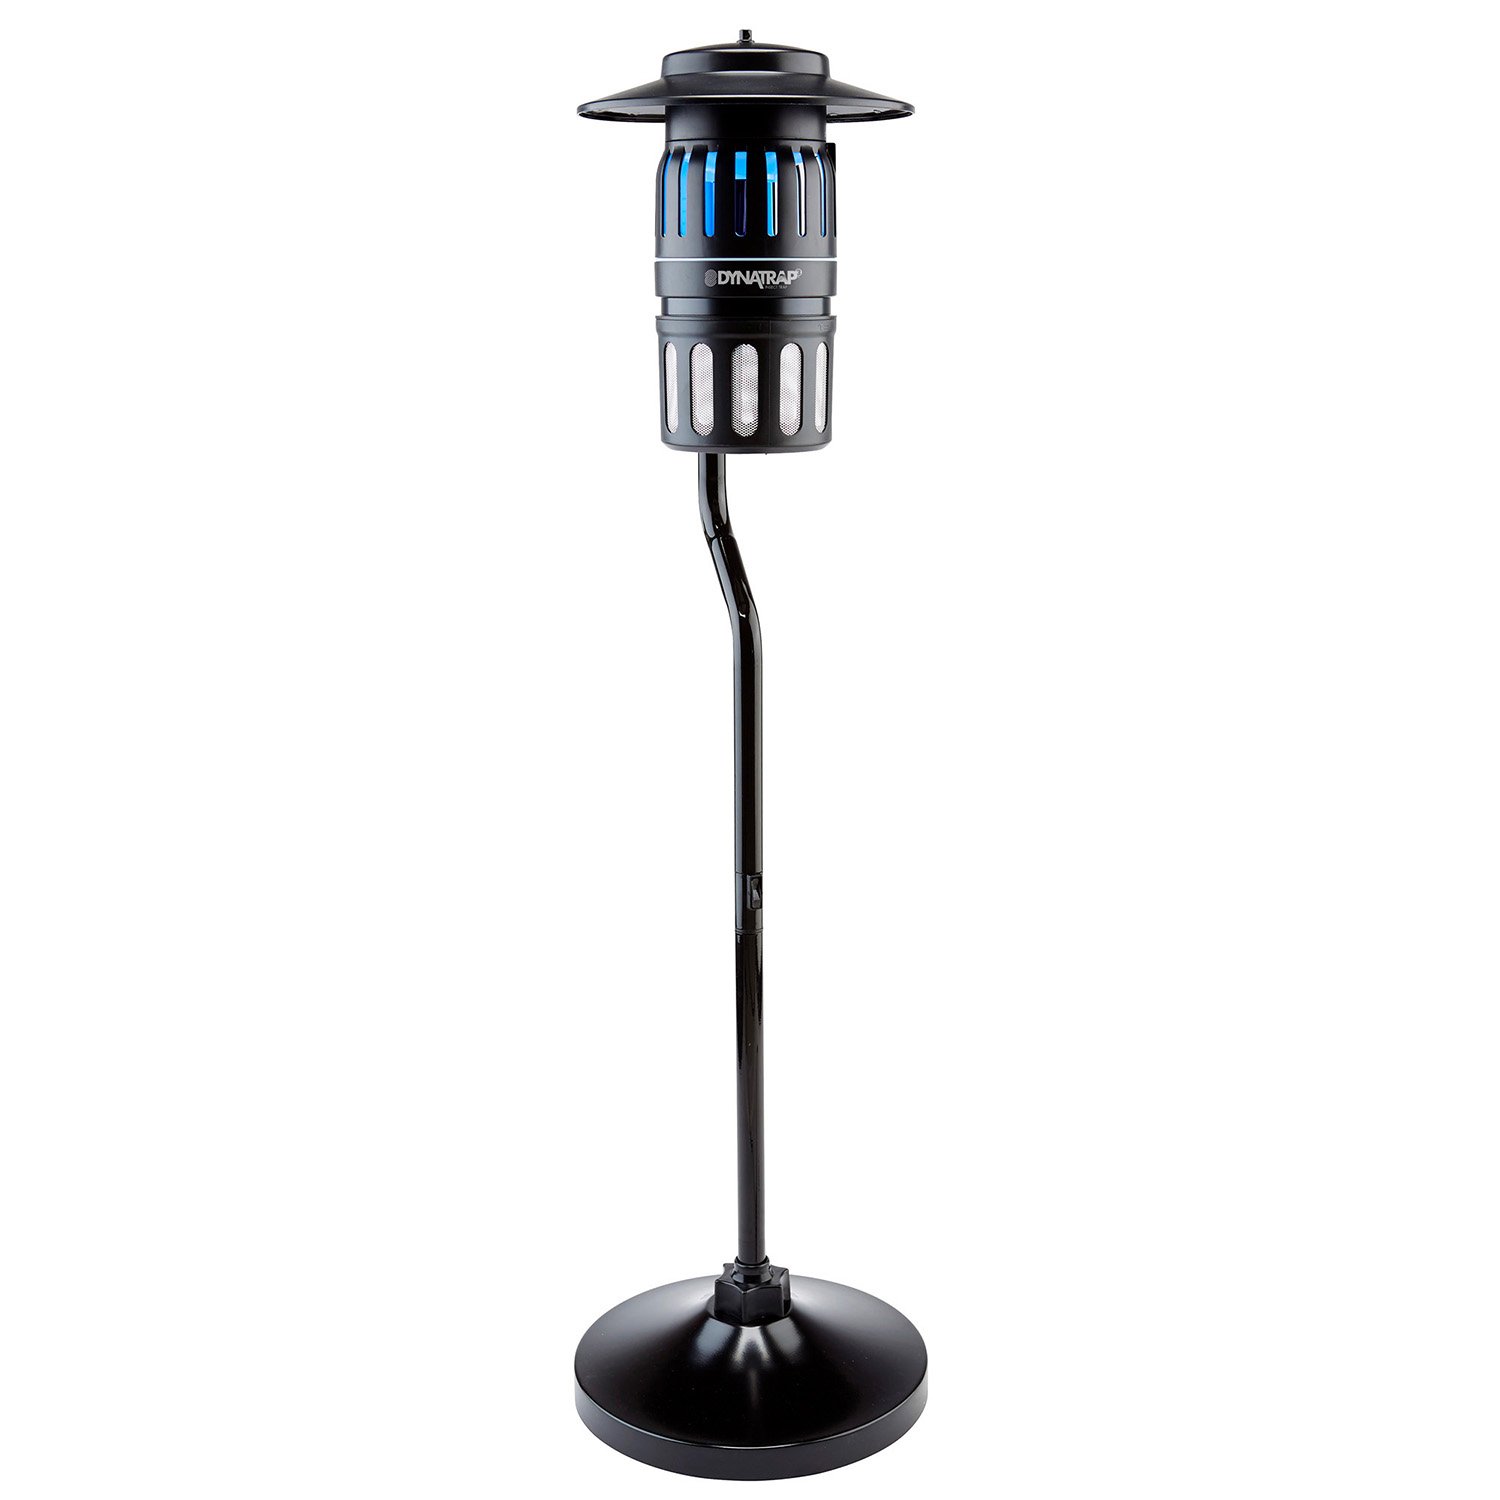 DynaTrap Insect Trap with Pole Mount (1/2 acre) $69.98